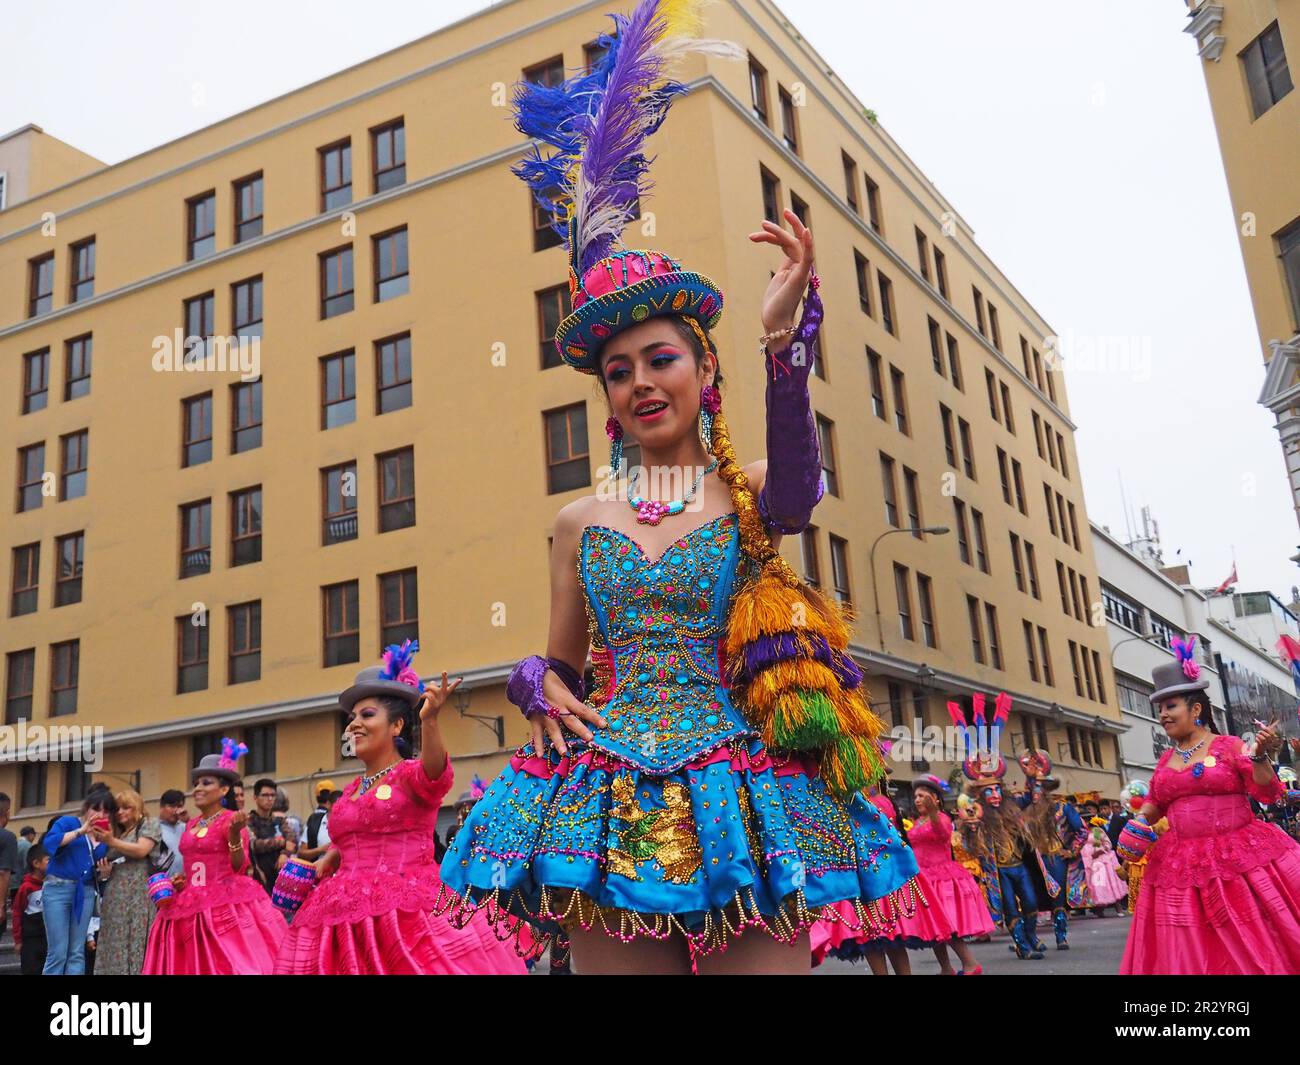 Lima, Peru. 21st May, 2023. Group of women performing when Peruvian Indigenous folk dancers wearing traditional costumes from the Andean regions took to the streets of Lima downtown again, as they used to do every Sunday before the pandemic, to spread their colorful dances and ancestral traditions. Credit: Fotoholica Press Agency/Alamy Live News Stock Photo